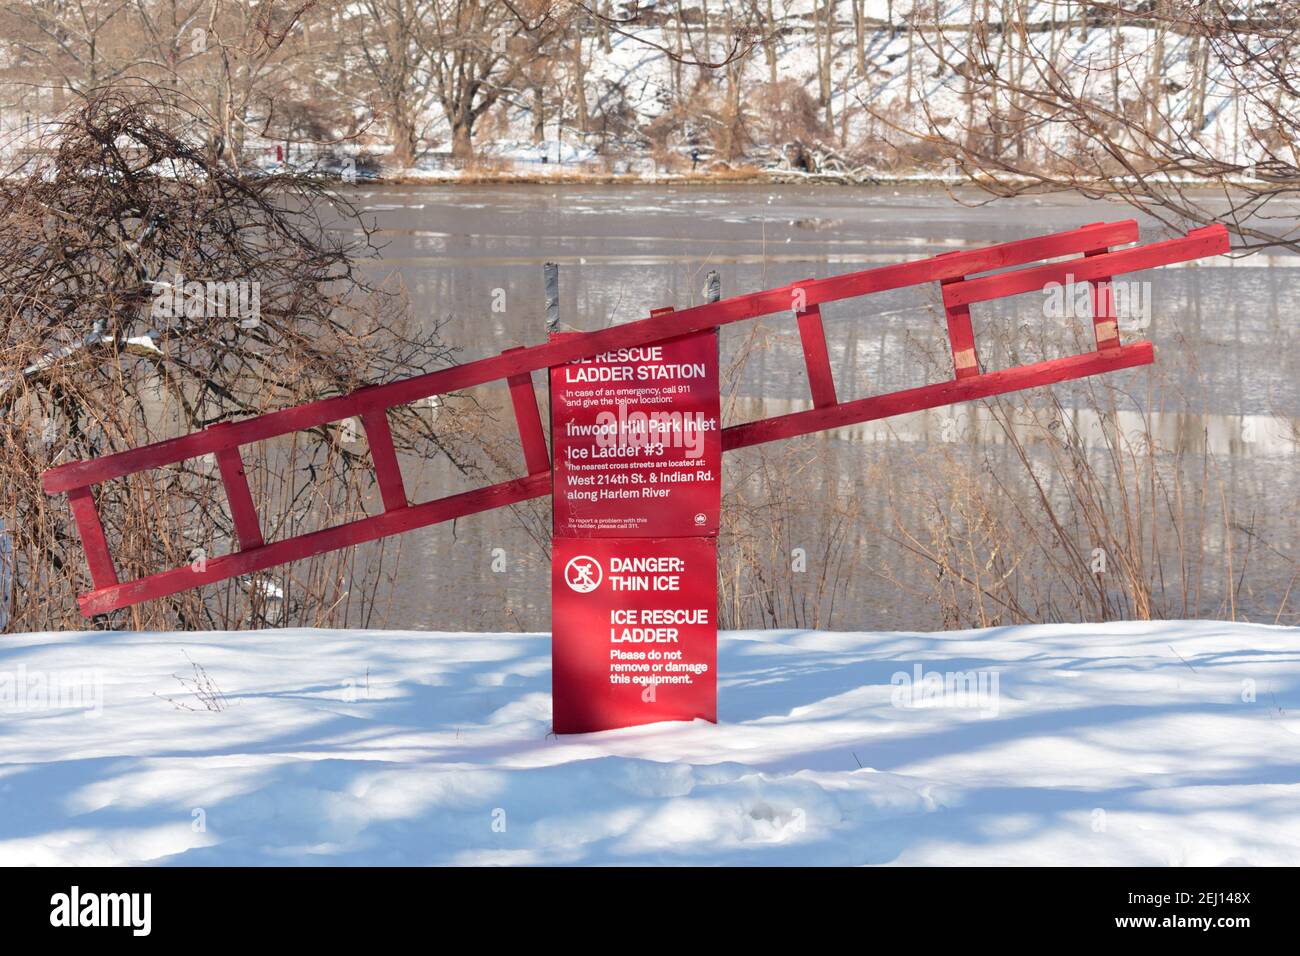 bright red ice rescue ladder station with a danger warning of thin ice in Inwood HIll Park in New York after a snowstorm with snow covered ground Stock Photo